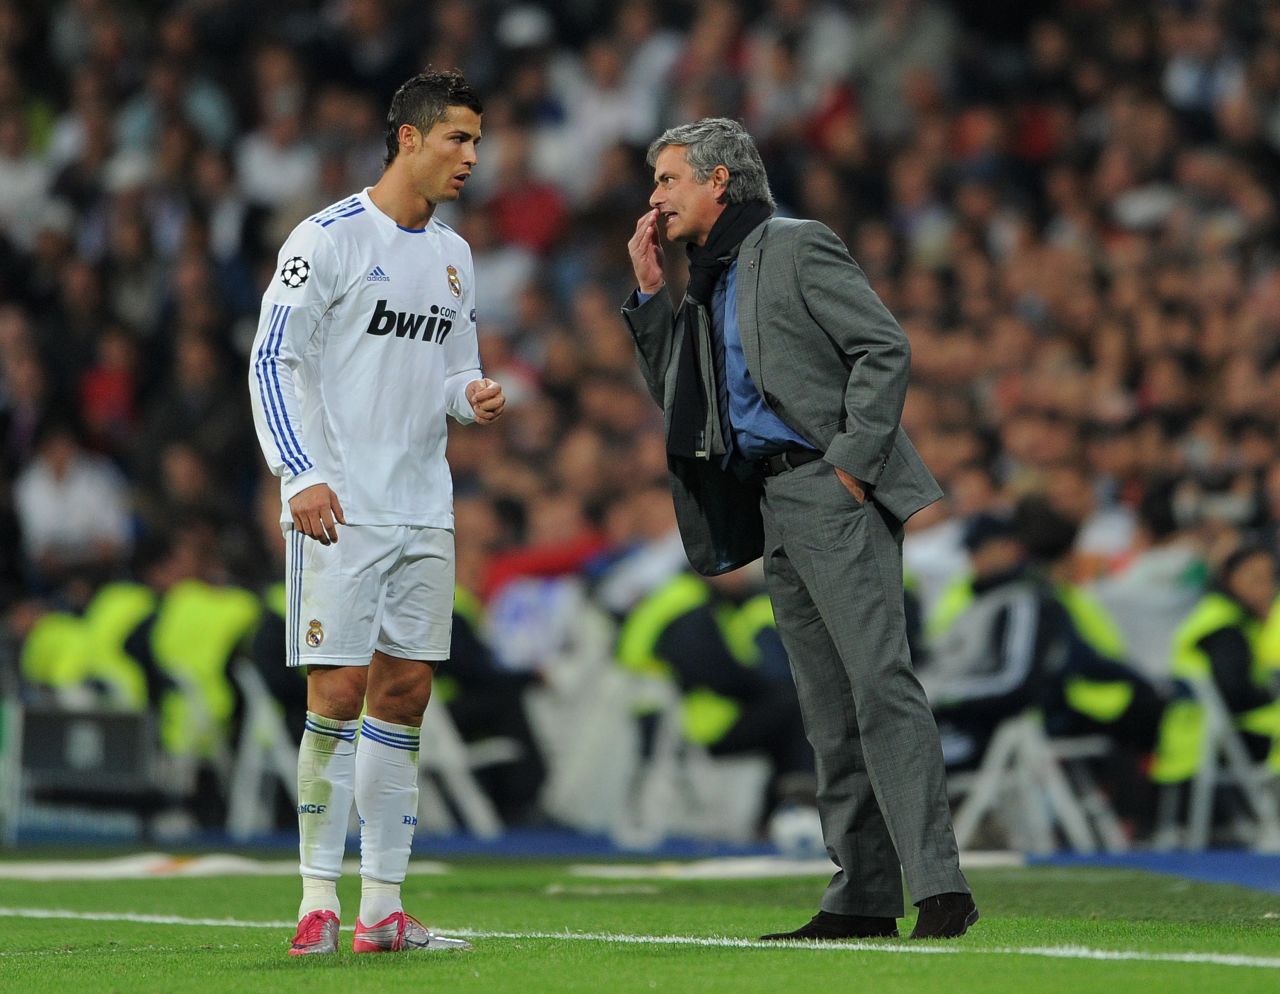 Ronaldo has nothing but praise for Real coach Jose Mourinho: "Well, my relationship with him is perfect. I don't ask for nothing better. In terms of coaching I'm sure 100%... 200% that he is the best. He shows every country who's the best because he wins all the leagues."